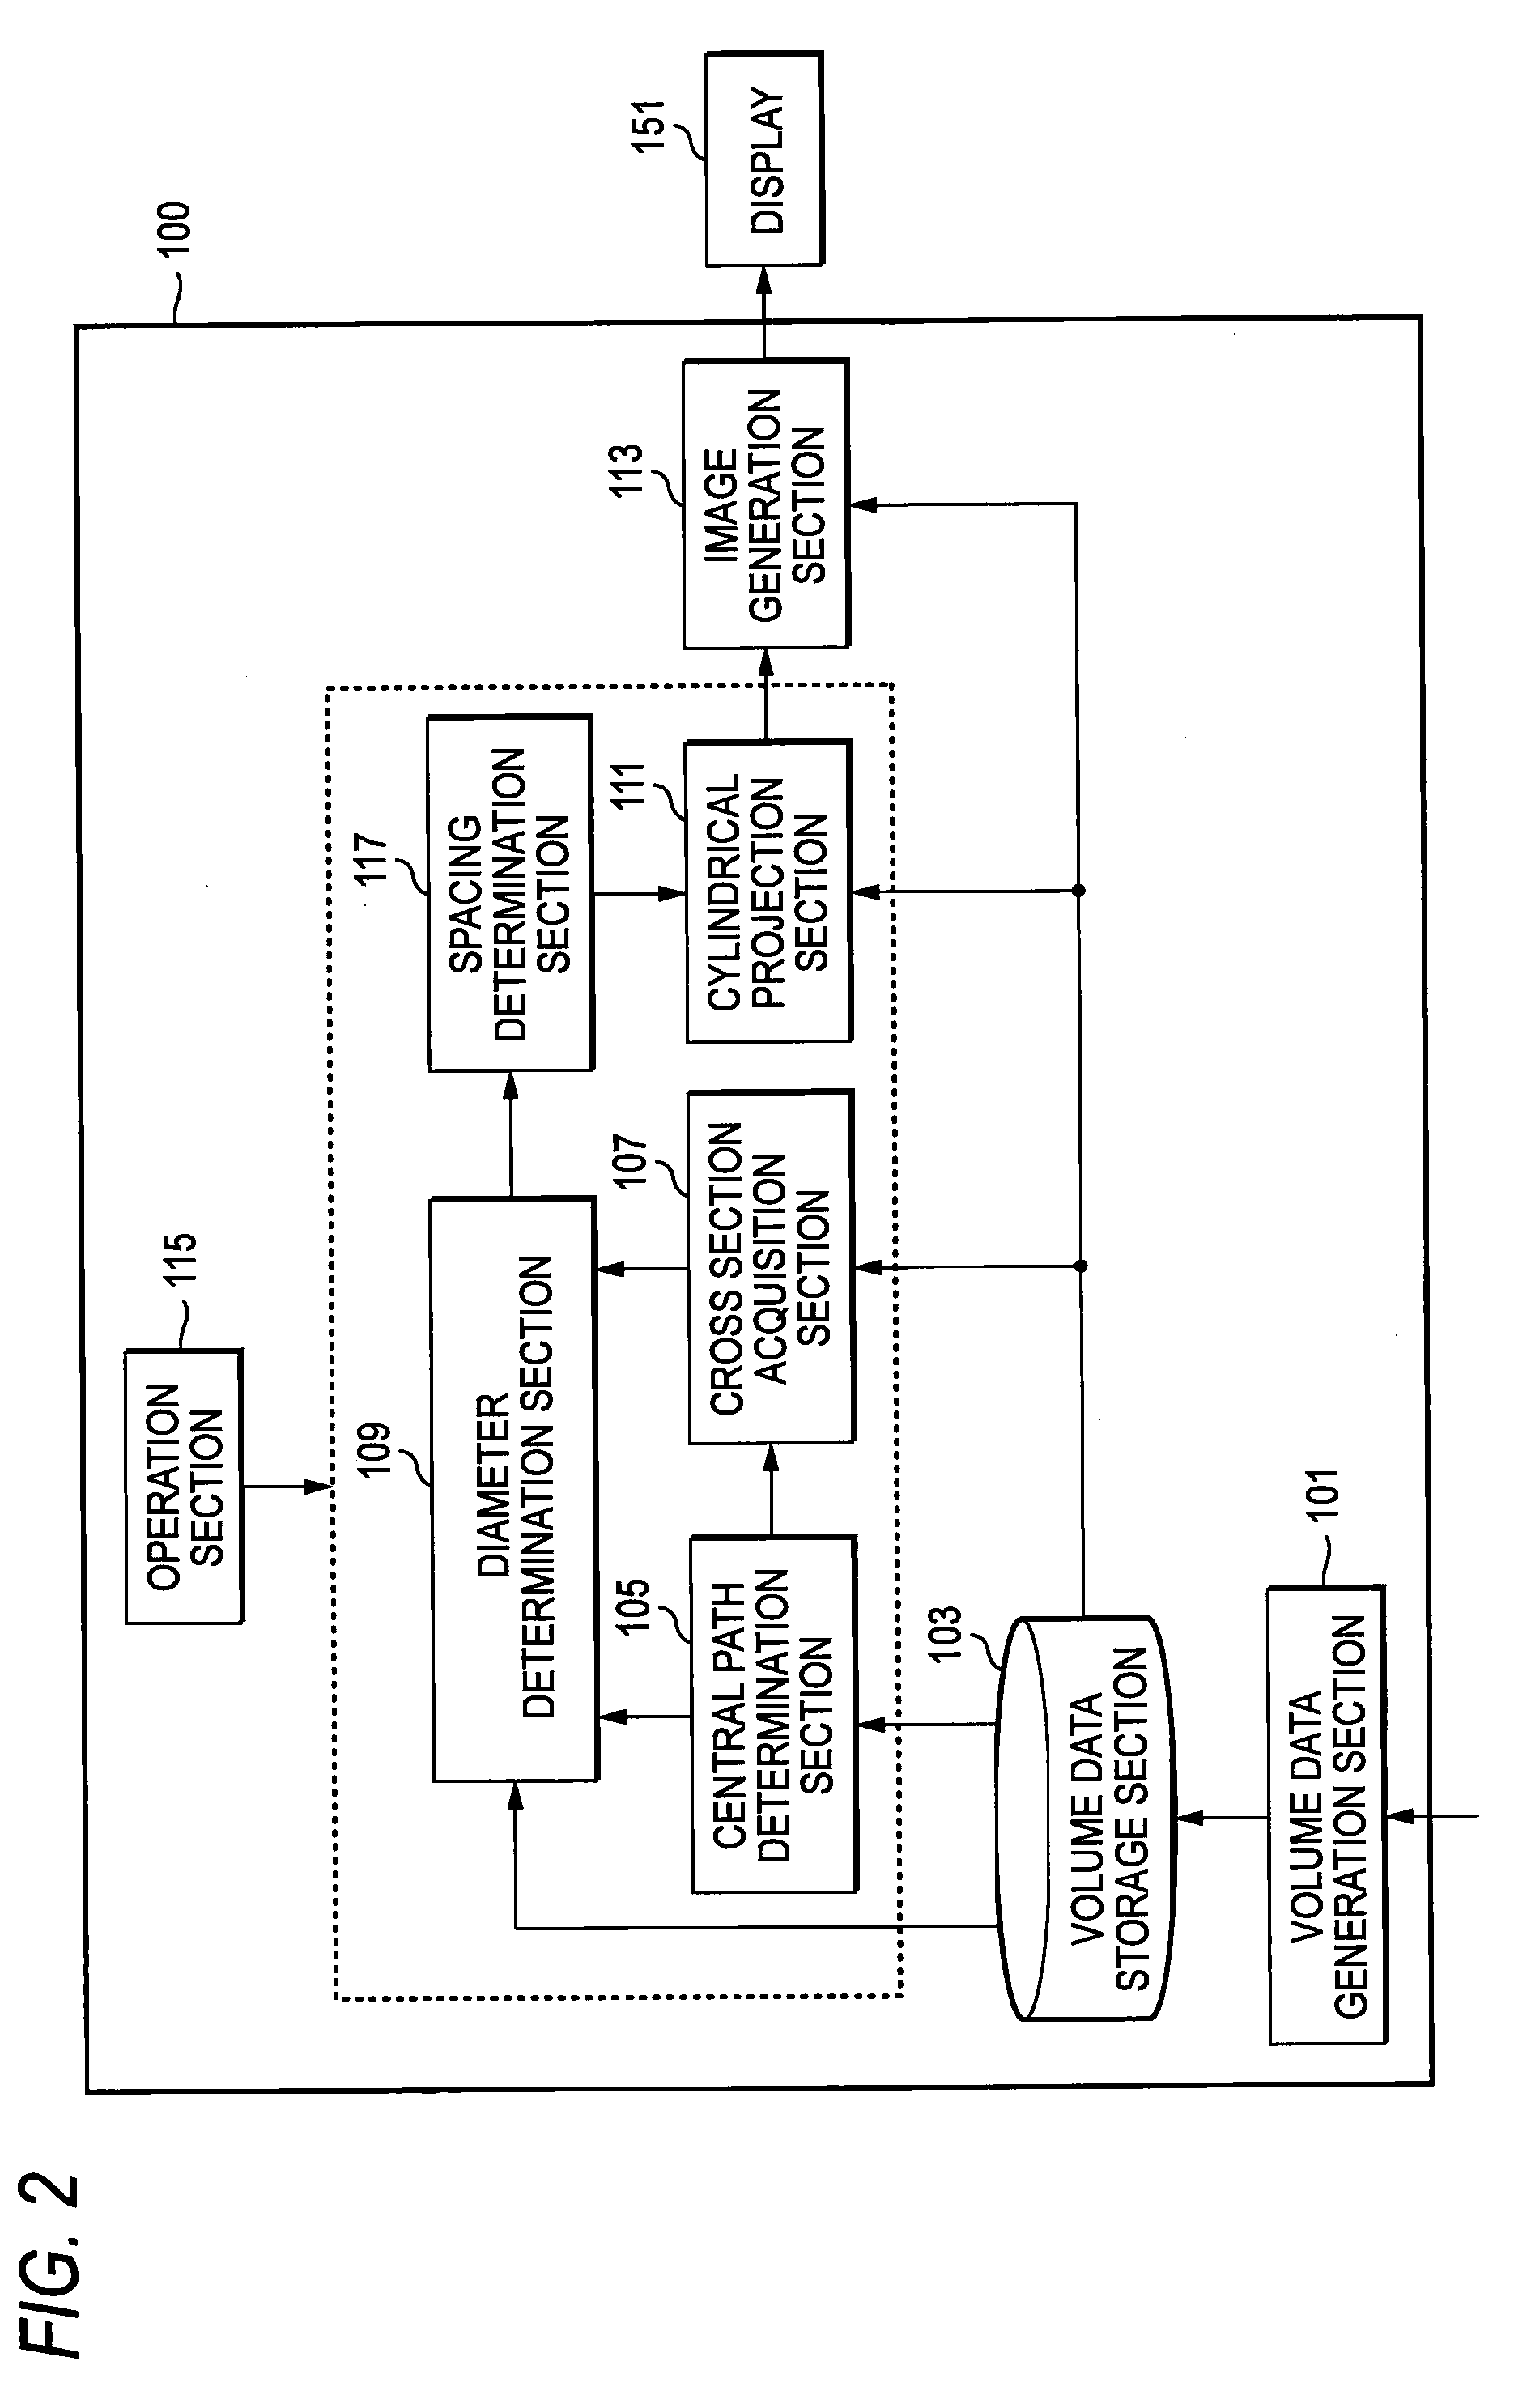 Medical image processing apparatus and method